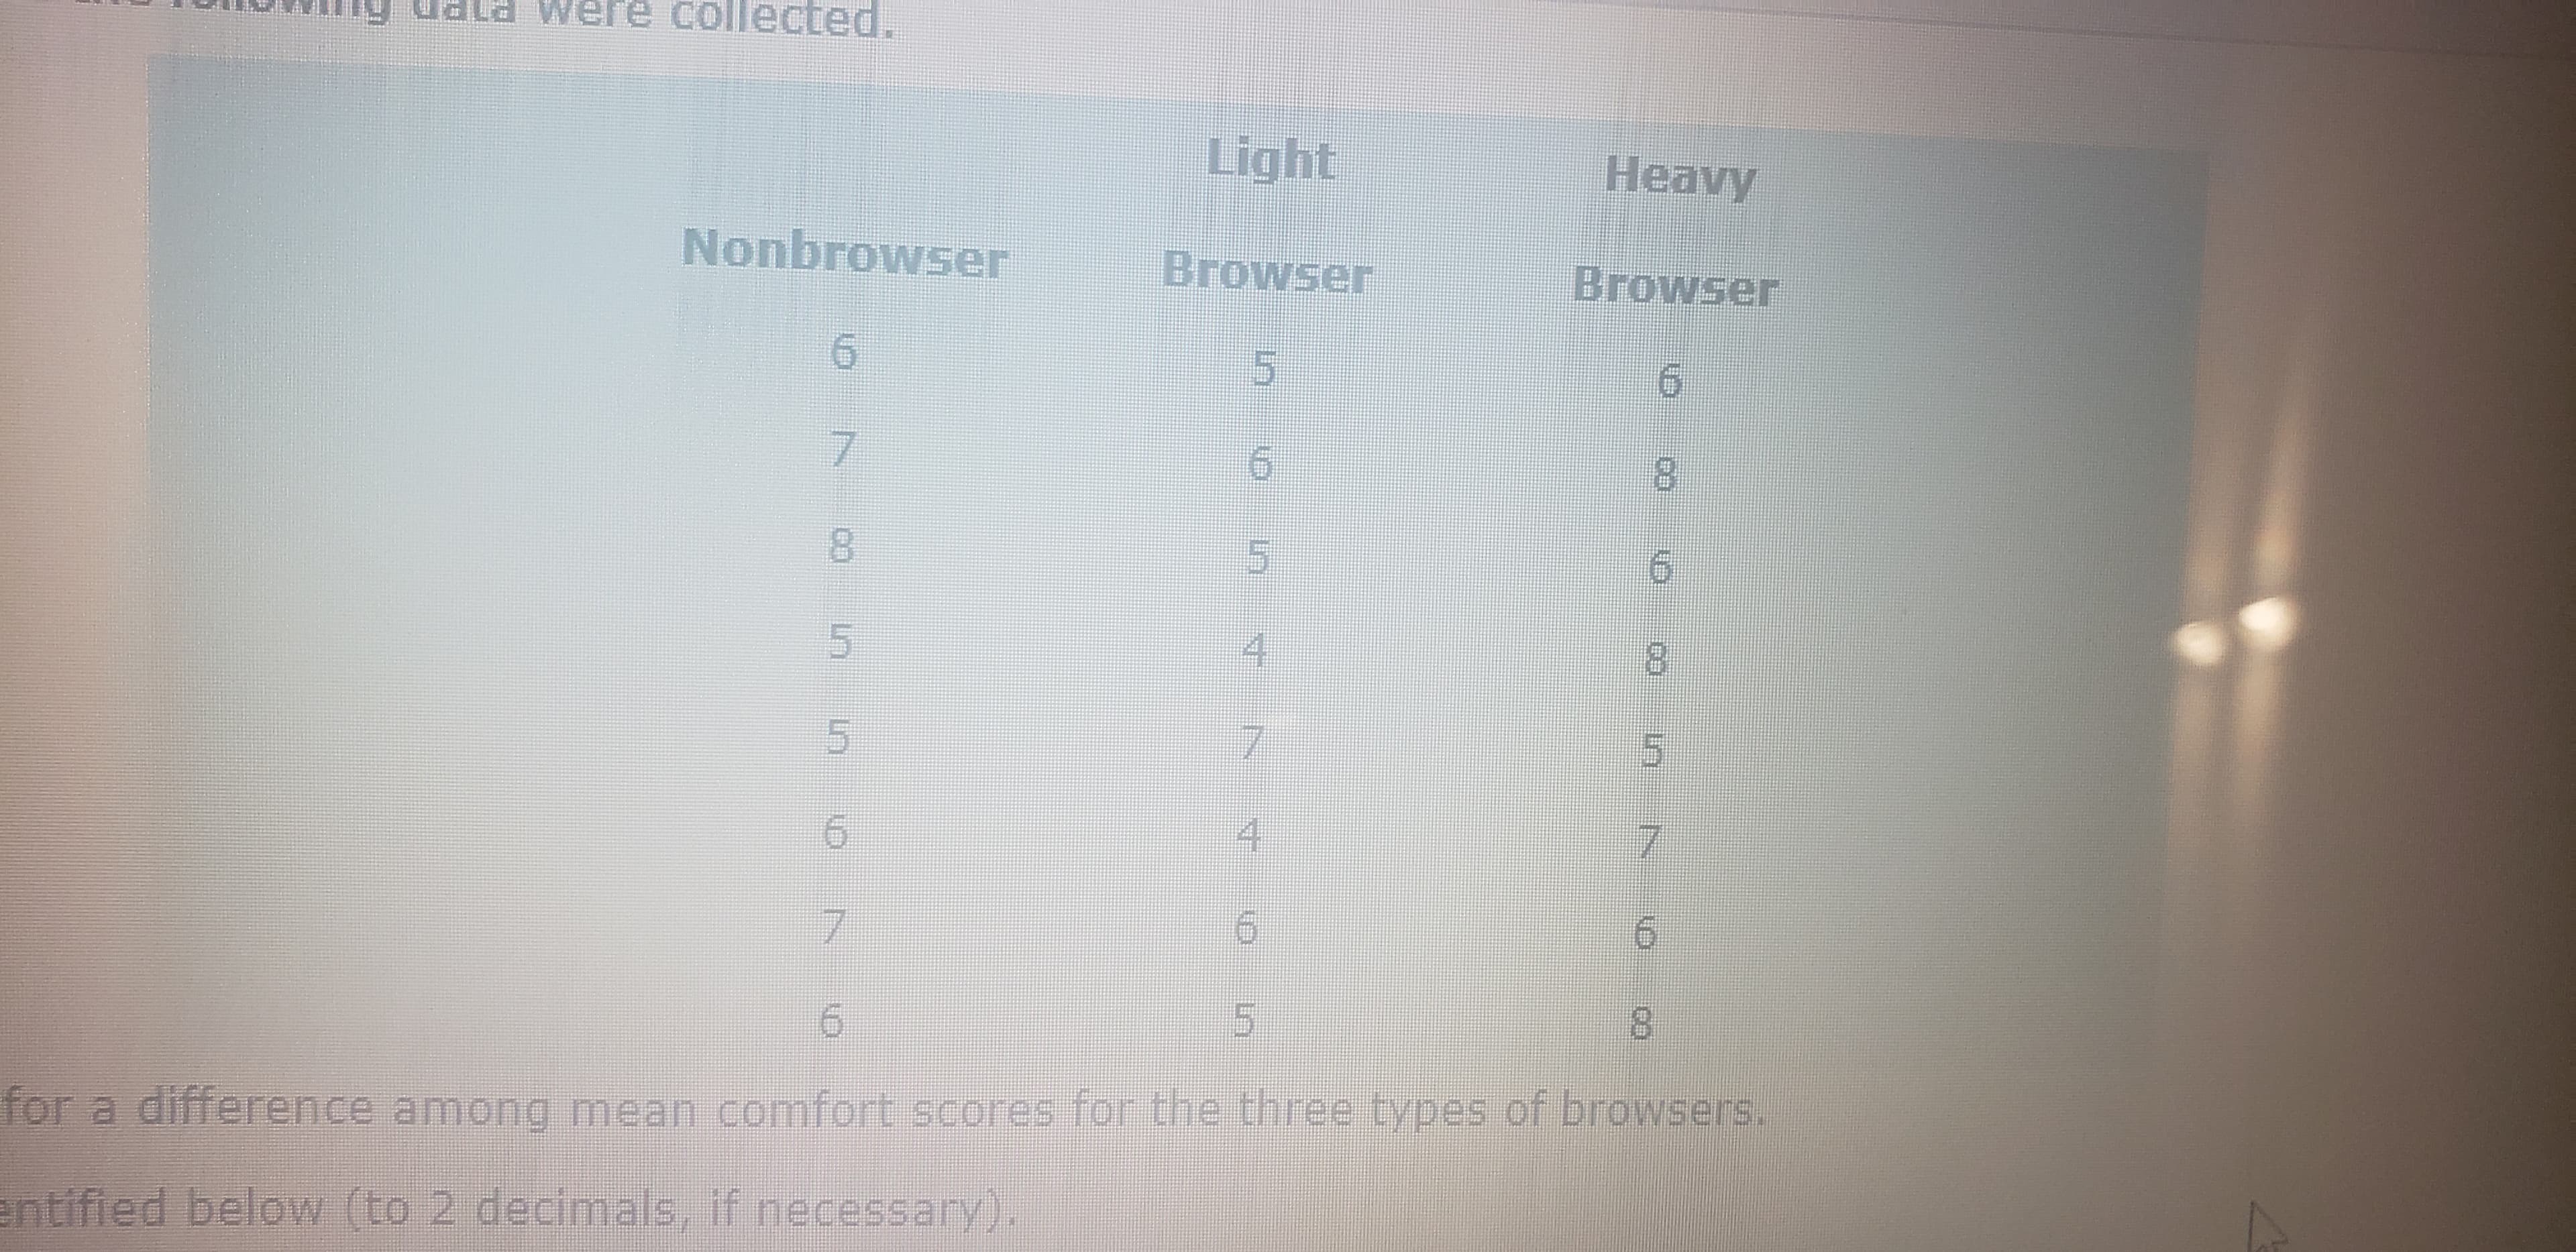 were collected.
Light
Нeavy
Nonbrowser
Browser
Browser
9.
7.
8.
for a difference among mean comfort scores for the three types of browsers.
entified below (to 2 decimals, if necessary).
